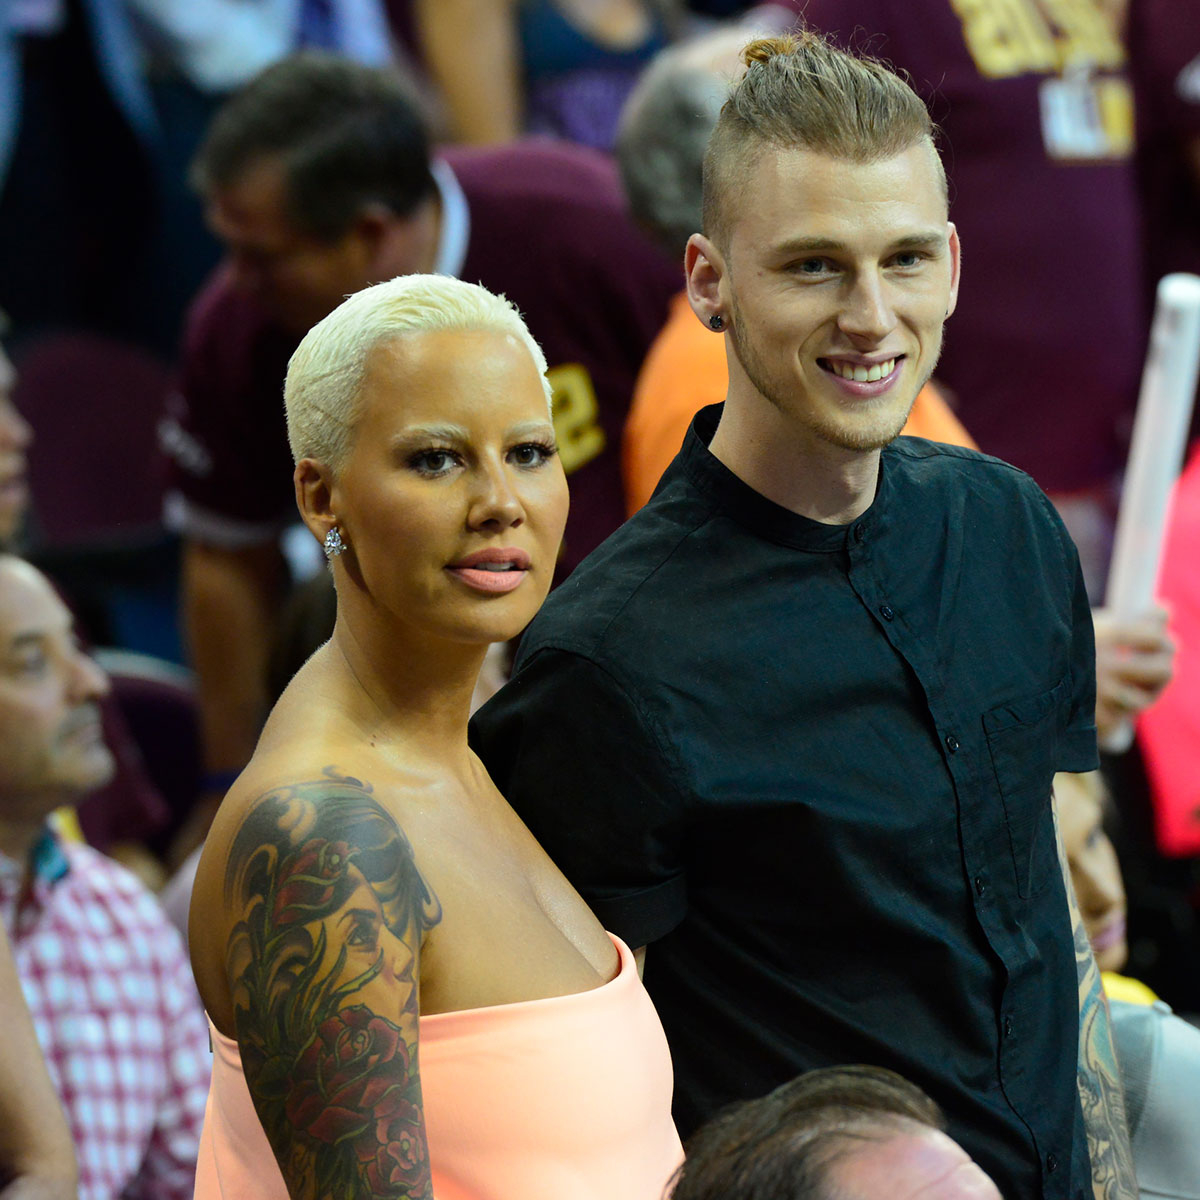 Amber Rose Says Ex-Boyfriend Machine Gun Kelly Apologized for Not Treating Her Better